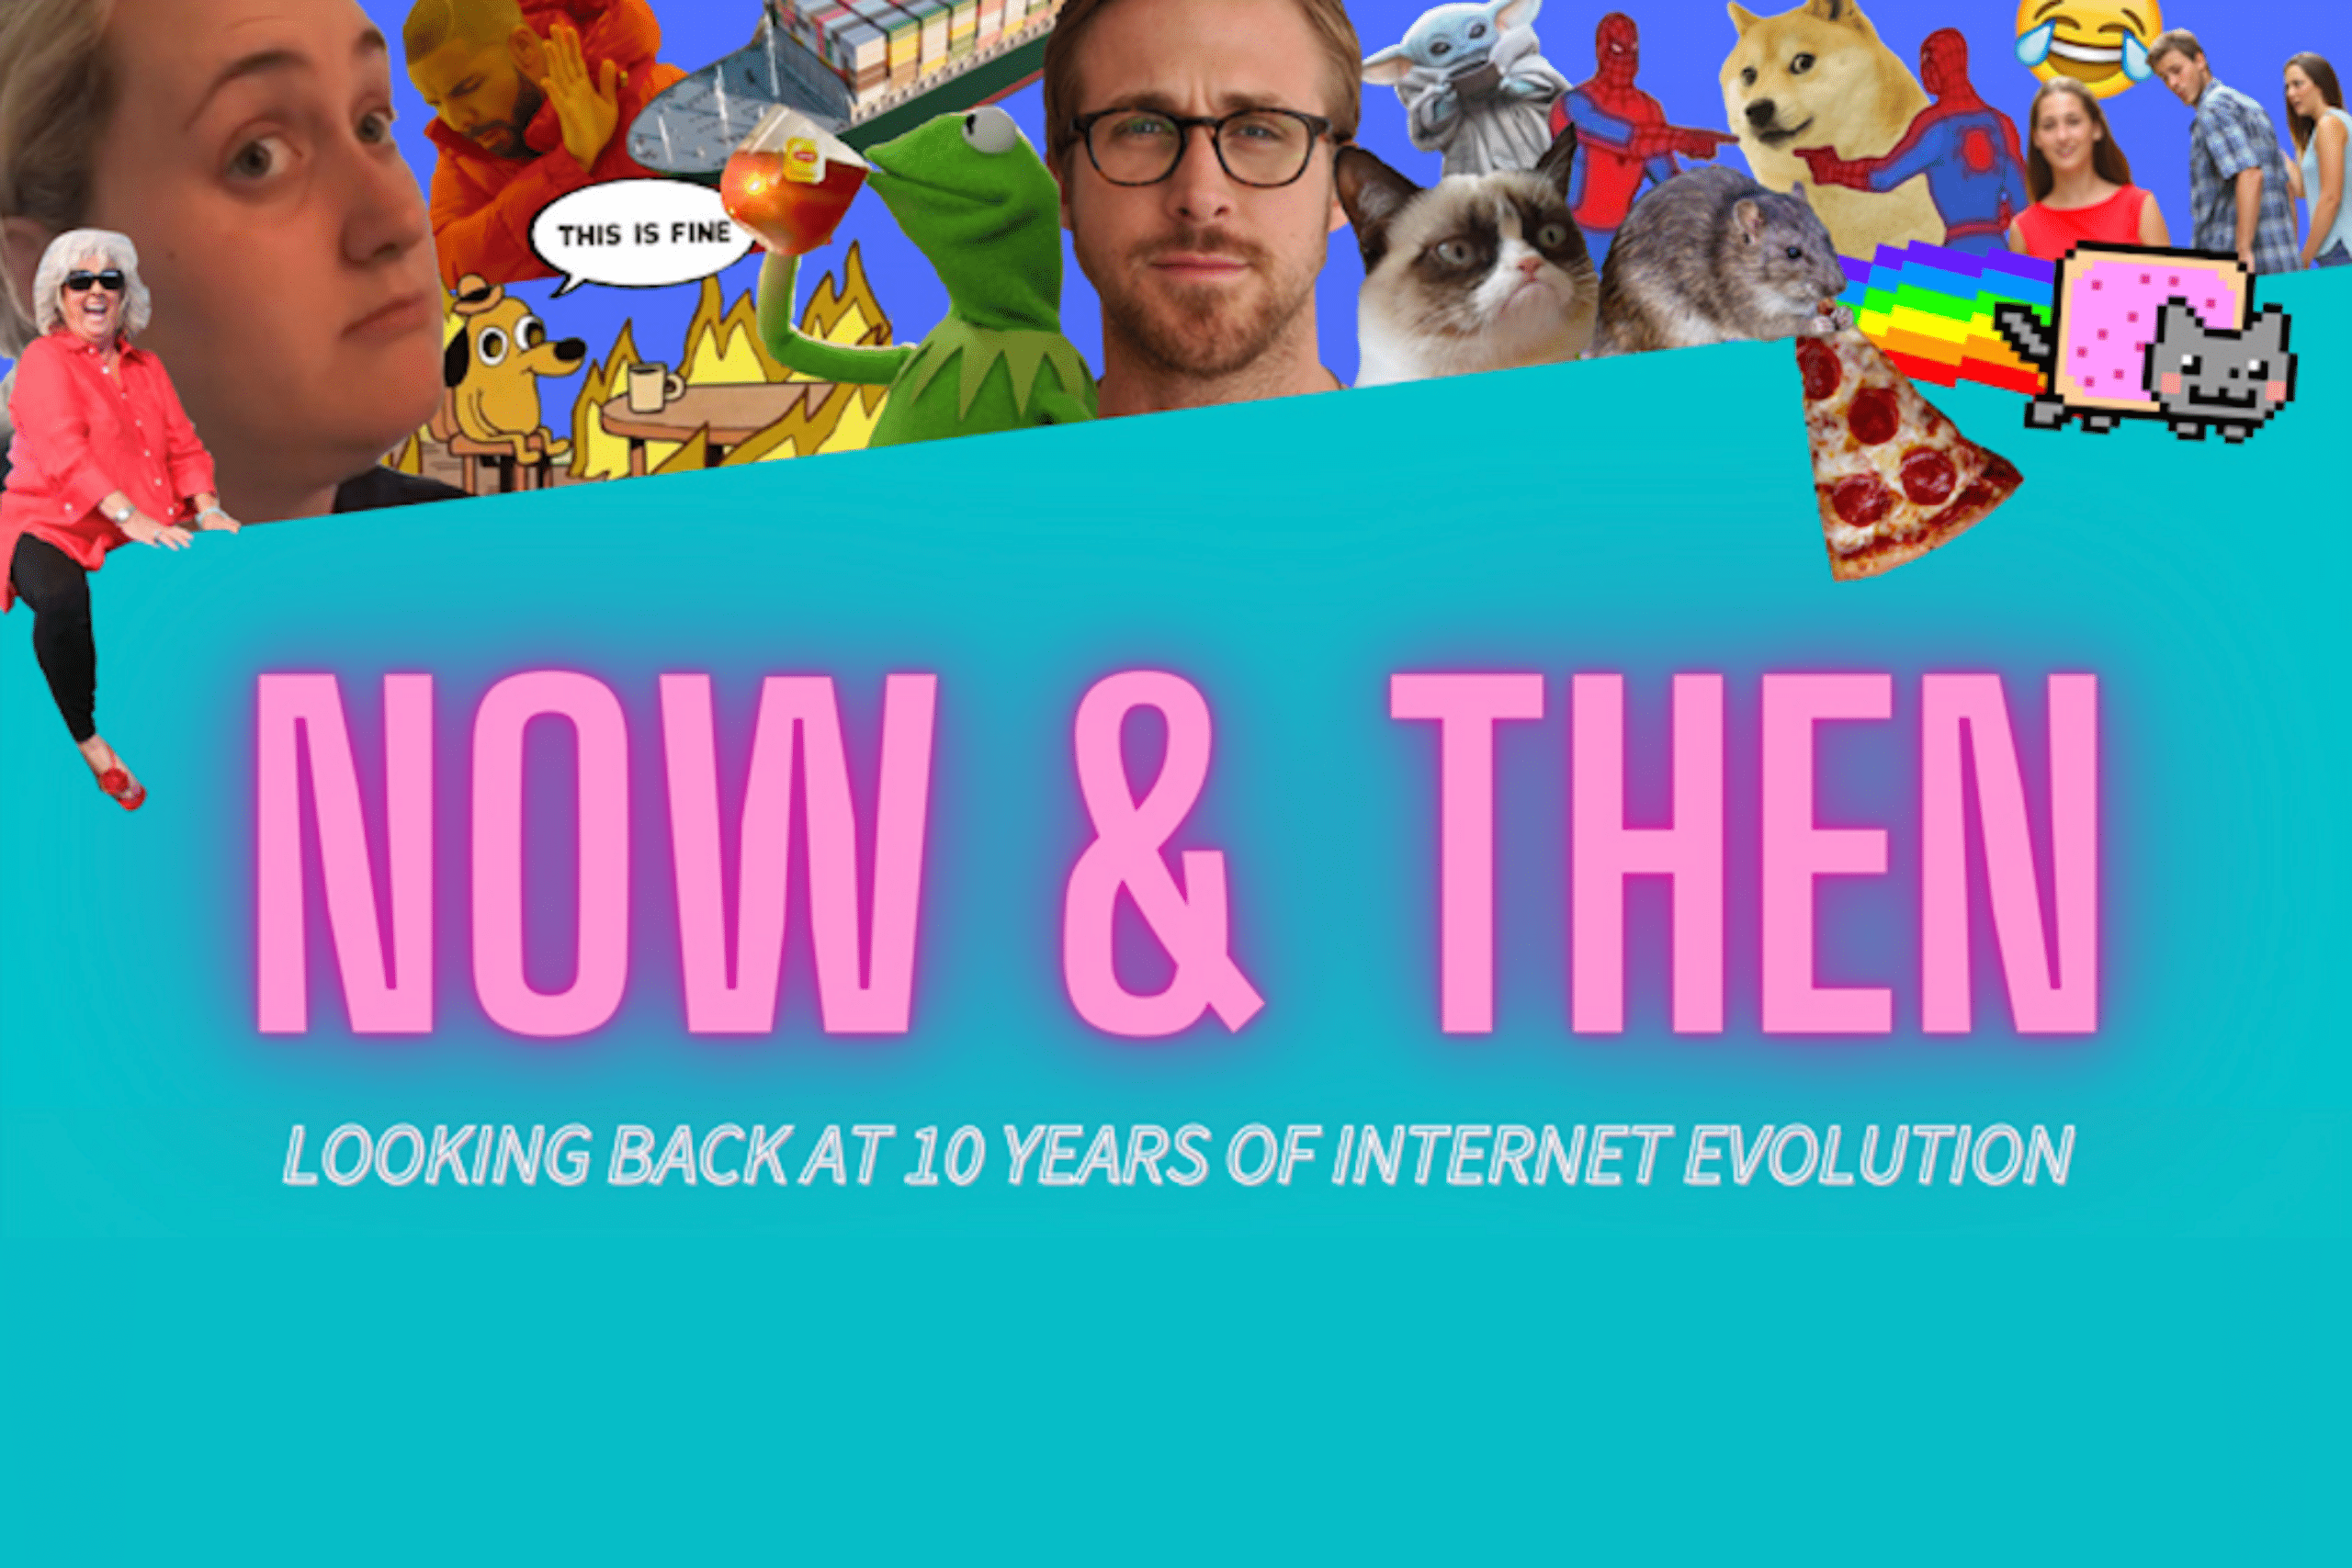 Now & Then- looking back on 10 years of internet evolution